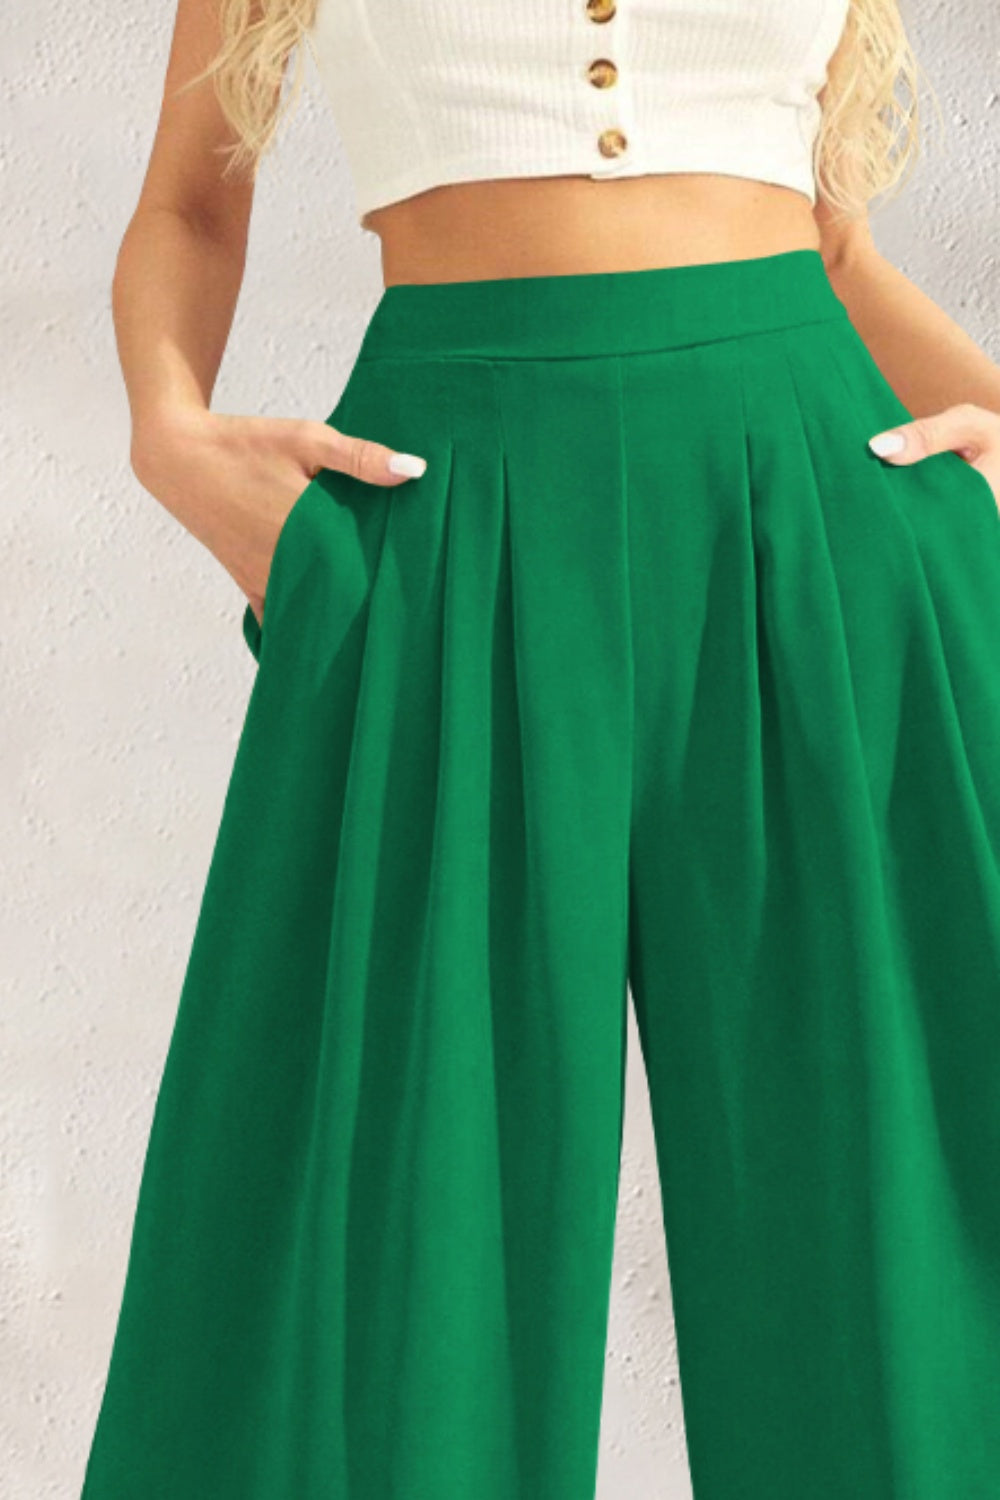 Discover elegance with our Wide Leg Pants - perfect high-waist fit, versatile style, and pocketed design for modern women.